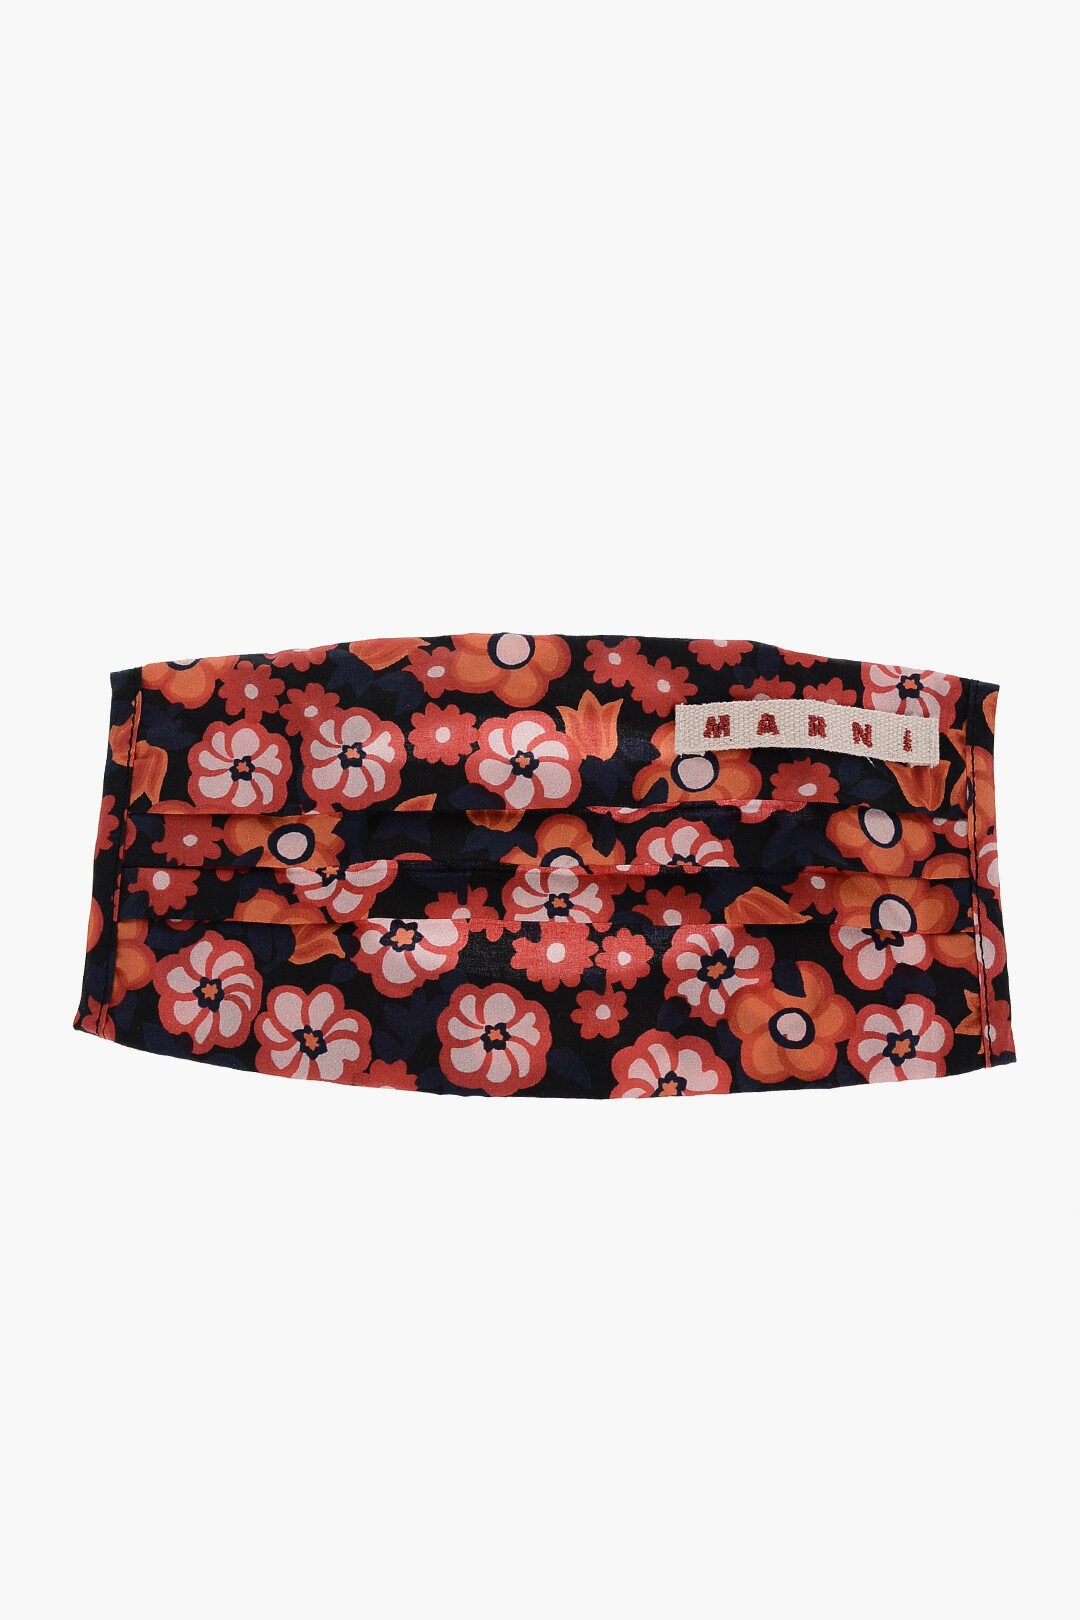 MARNI マルニ 帽子 ACMC0062A0 UTCZ54 PGN99 レディース FLORAL PATTERNED COTTON FACE MASK COVER 【関税・送料無料】【ラッピング無料】 dk